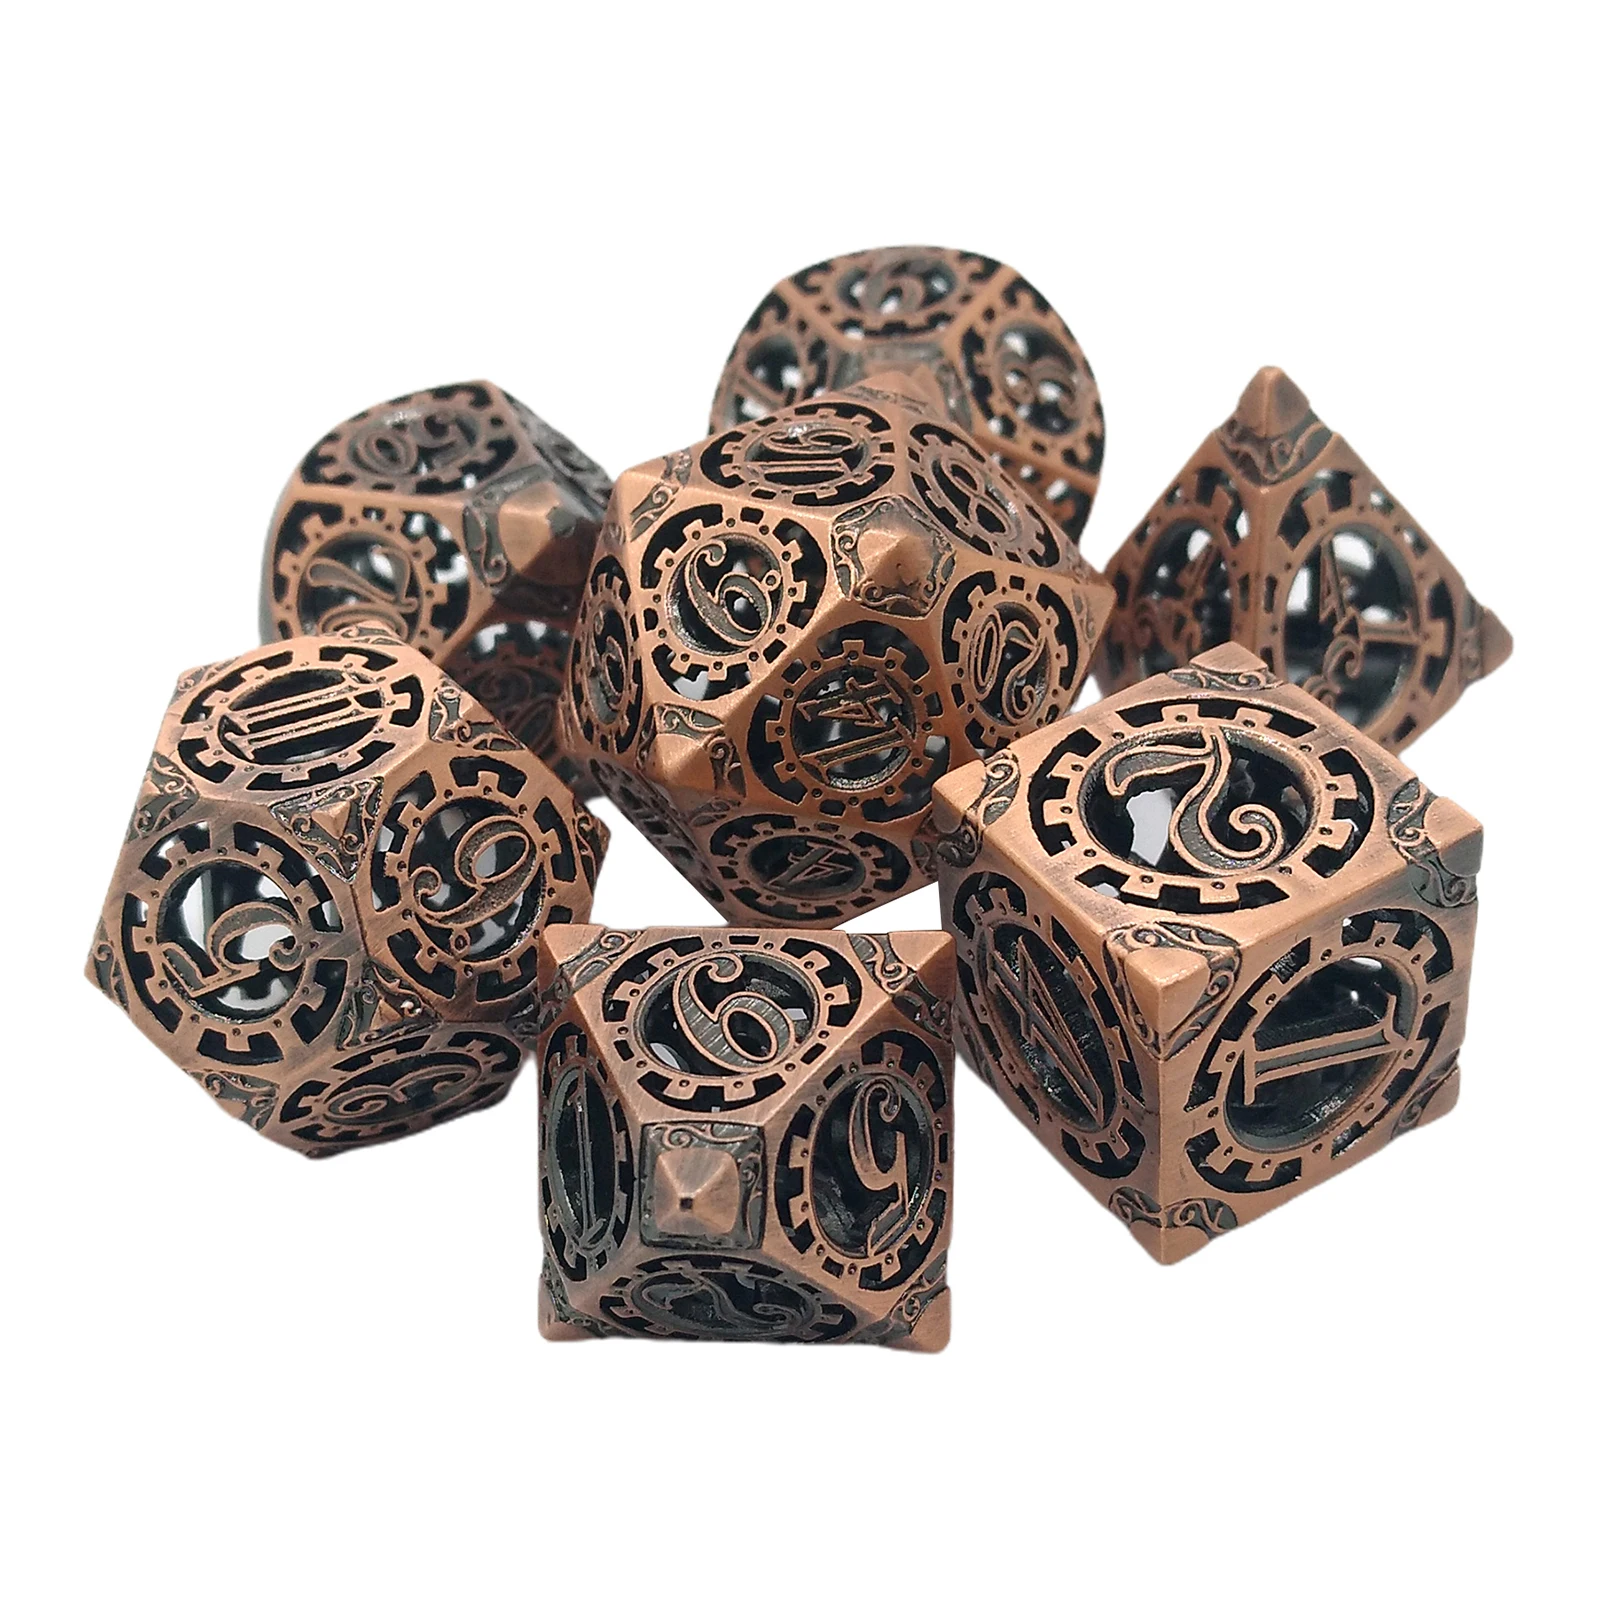 with Metal Case Hollow Metal DND Game Dice Skulls with Chain Edge Black and Gold 7Pcs Set for Dungeons and Dragons RPG MTG Table Games D&D Pathfinder Shadowrun and Math Teaching 